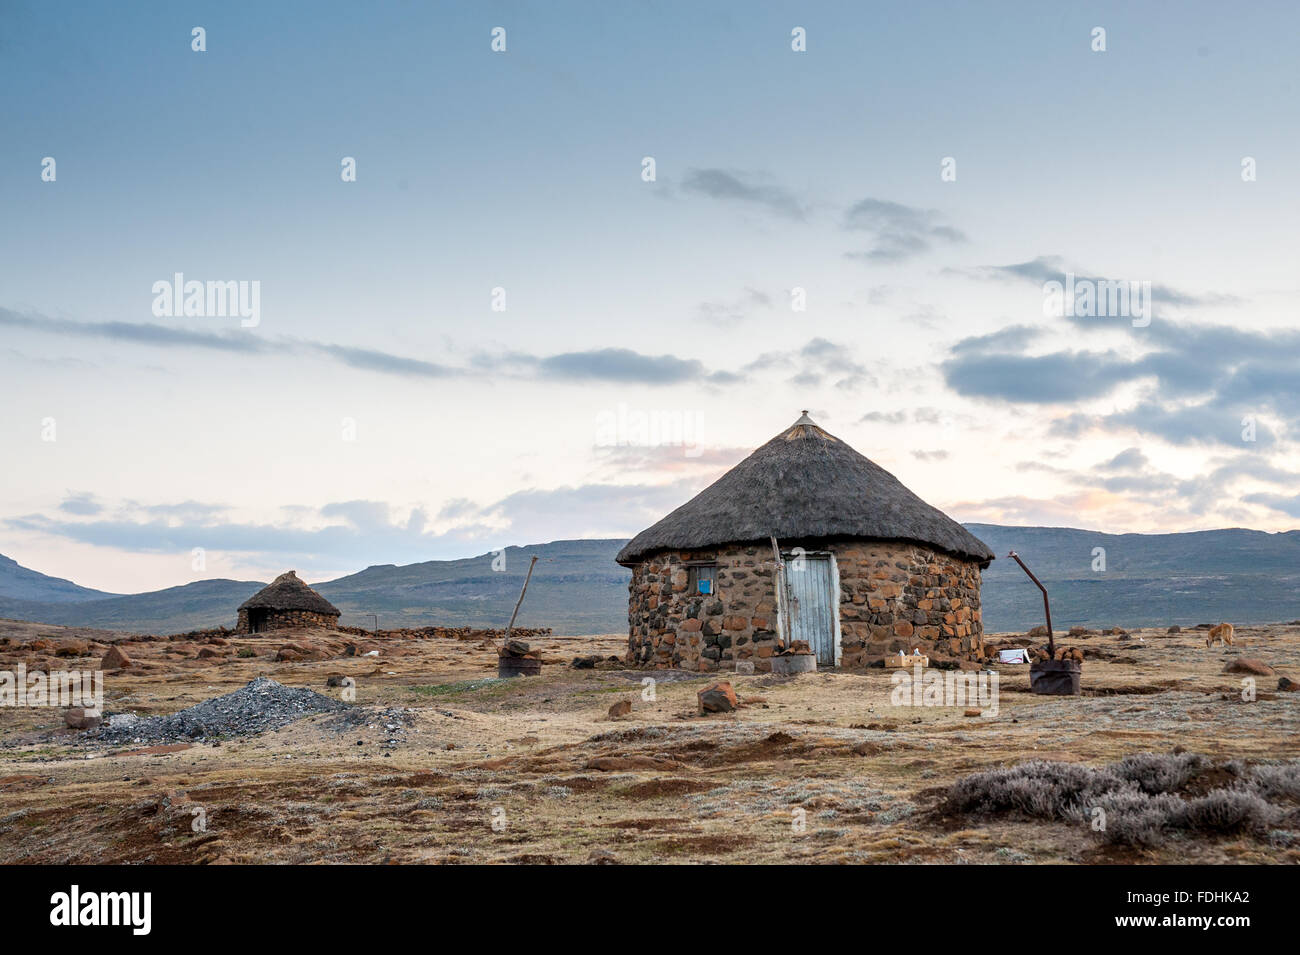 Village huts in Sani Pass, Lesotho, Africa. Stock Photo